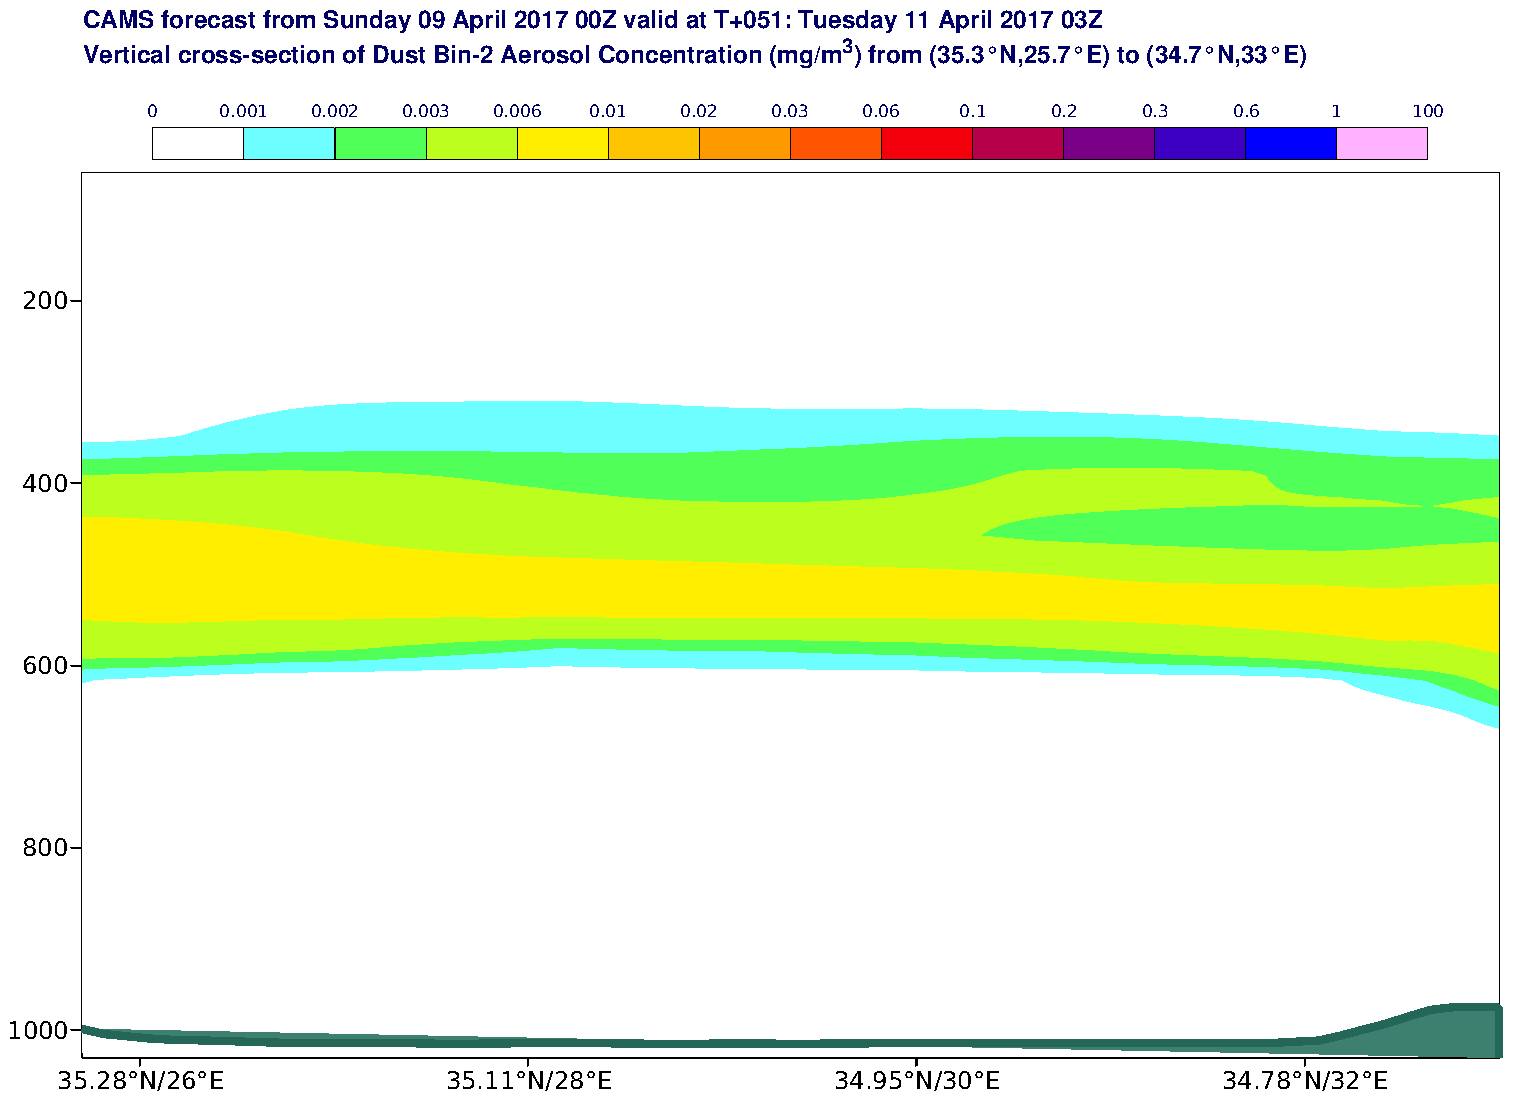 Vertical cross-section of Dust Bin-2 Aerosol Concentration (mg/m3) valid at T51 - 2017-04-11 03:00